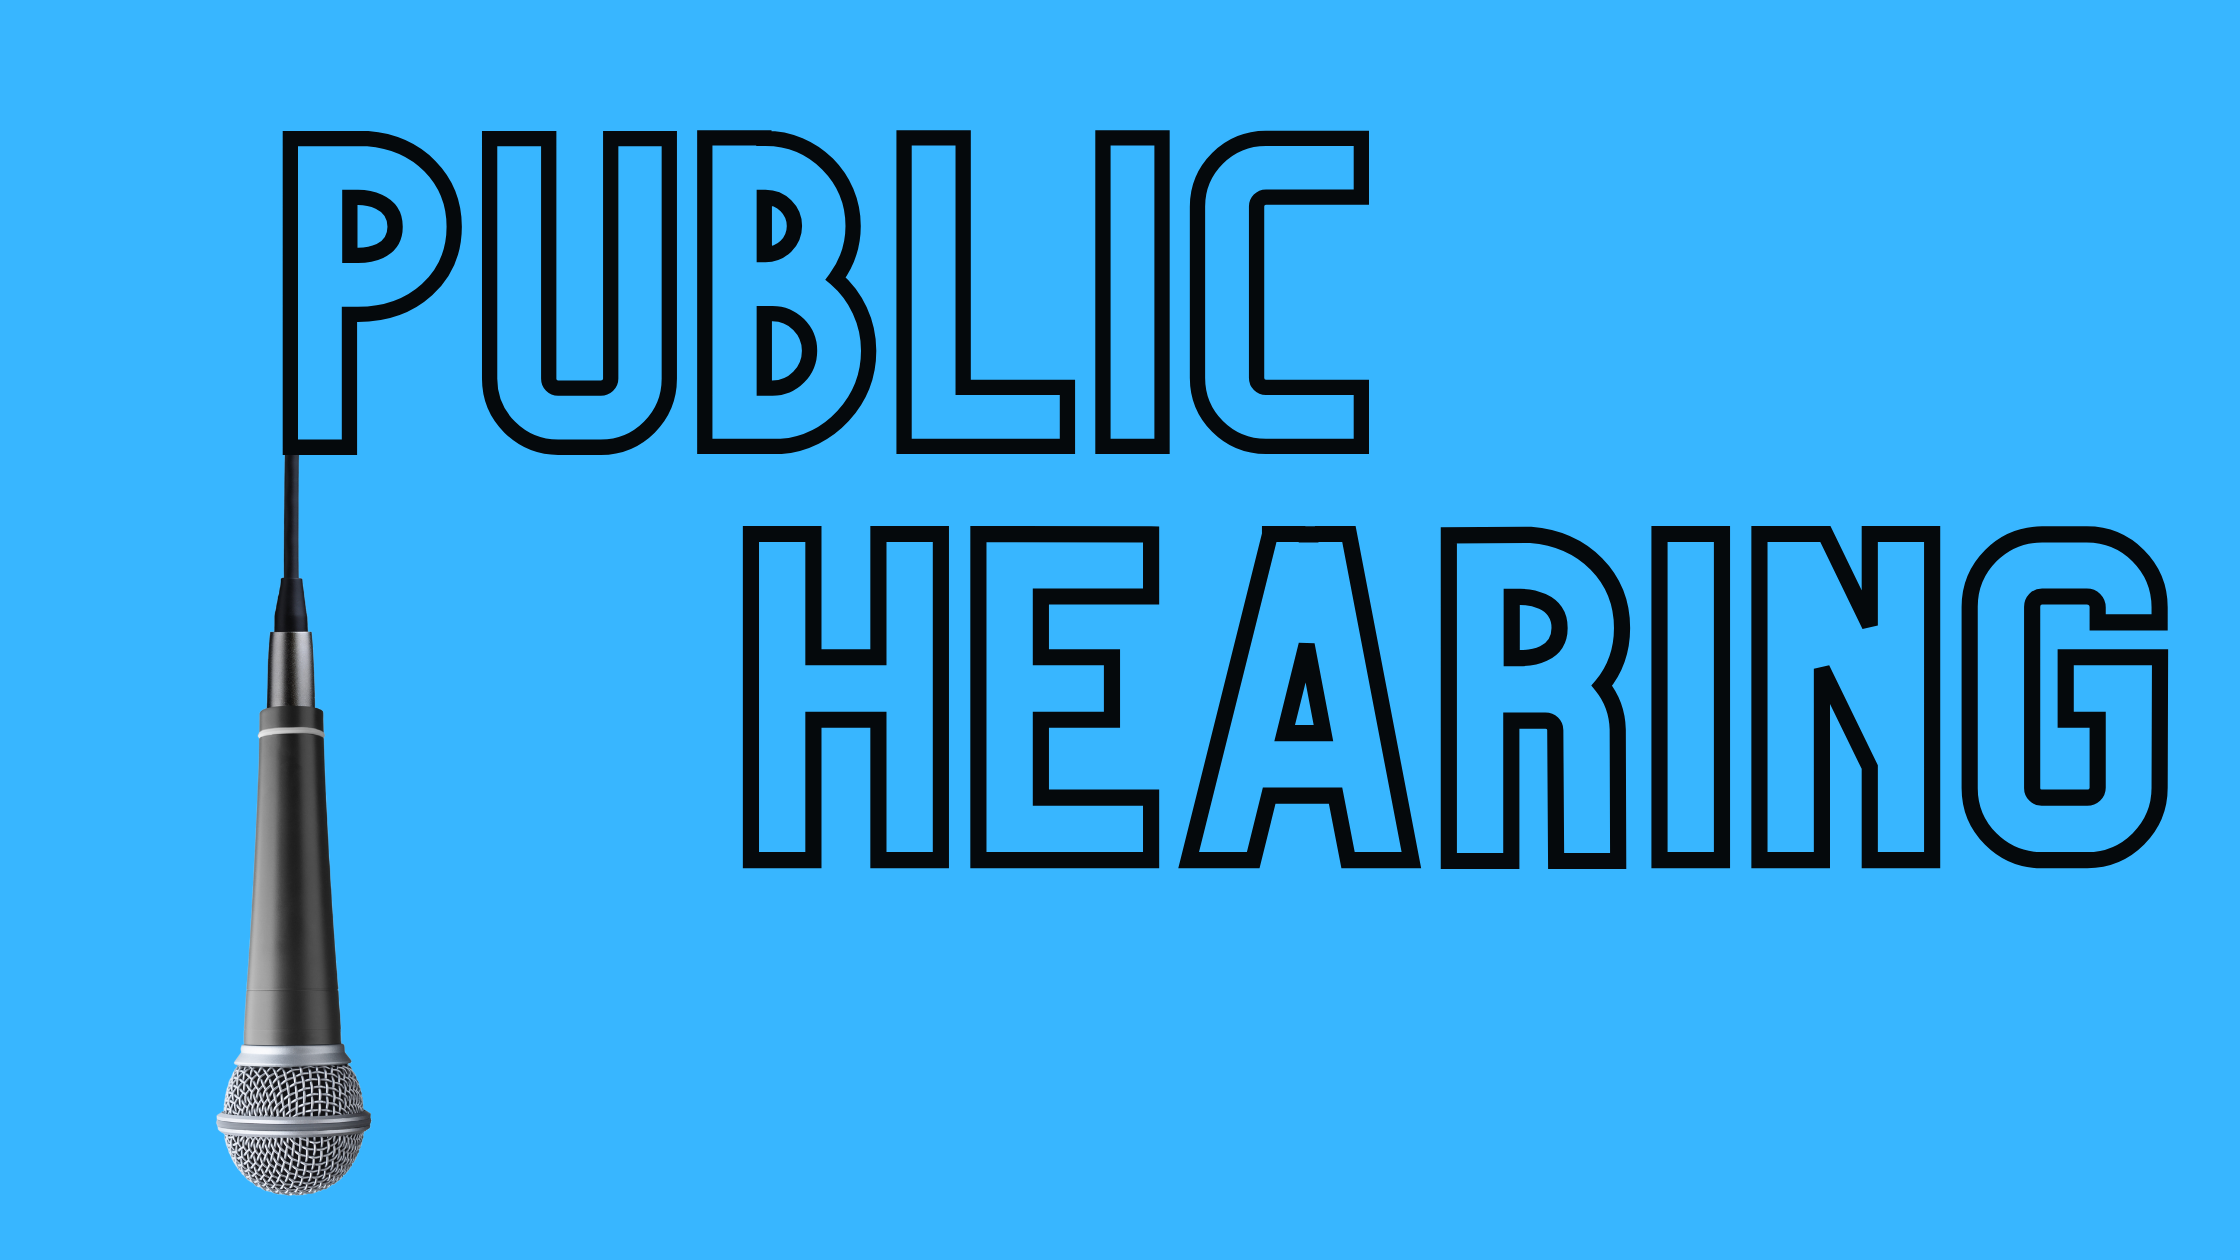 public hearing is in large hollow letters, a microphone hanging from the P